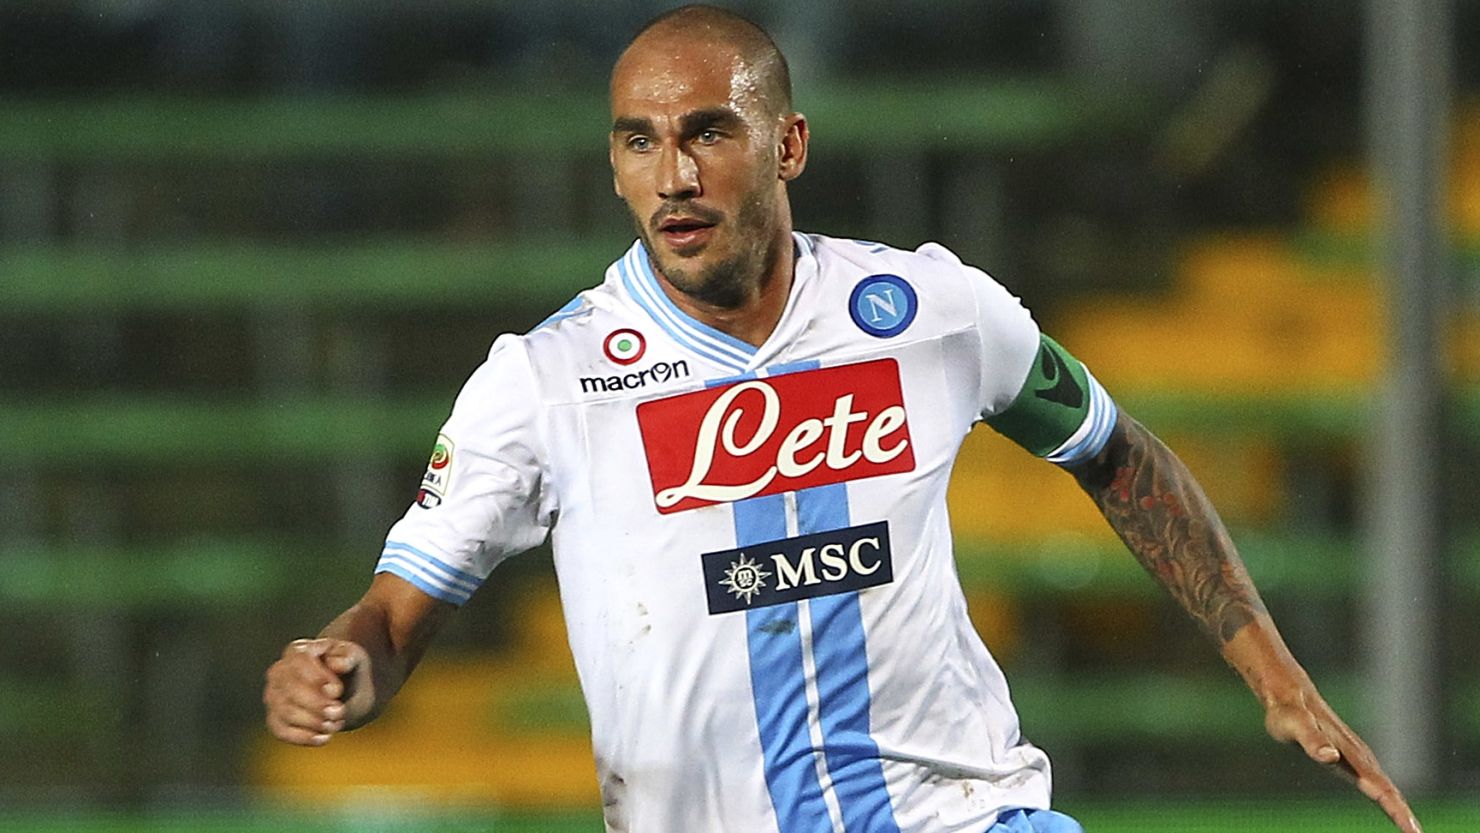 Napoli captain Paolo Cannavaro is appealing a six-month ban for failing to report a match-fixing approach